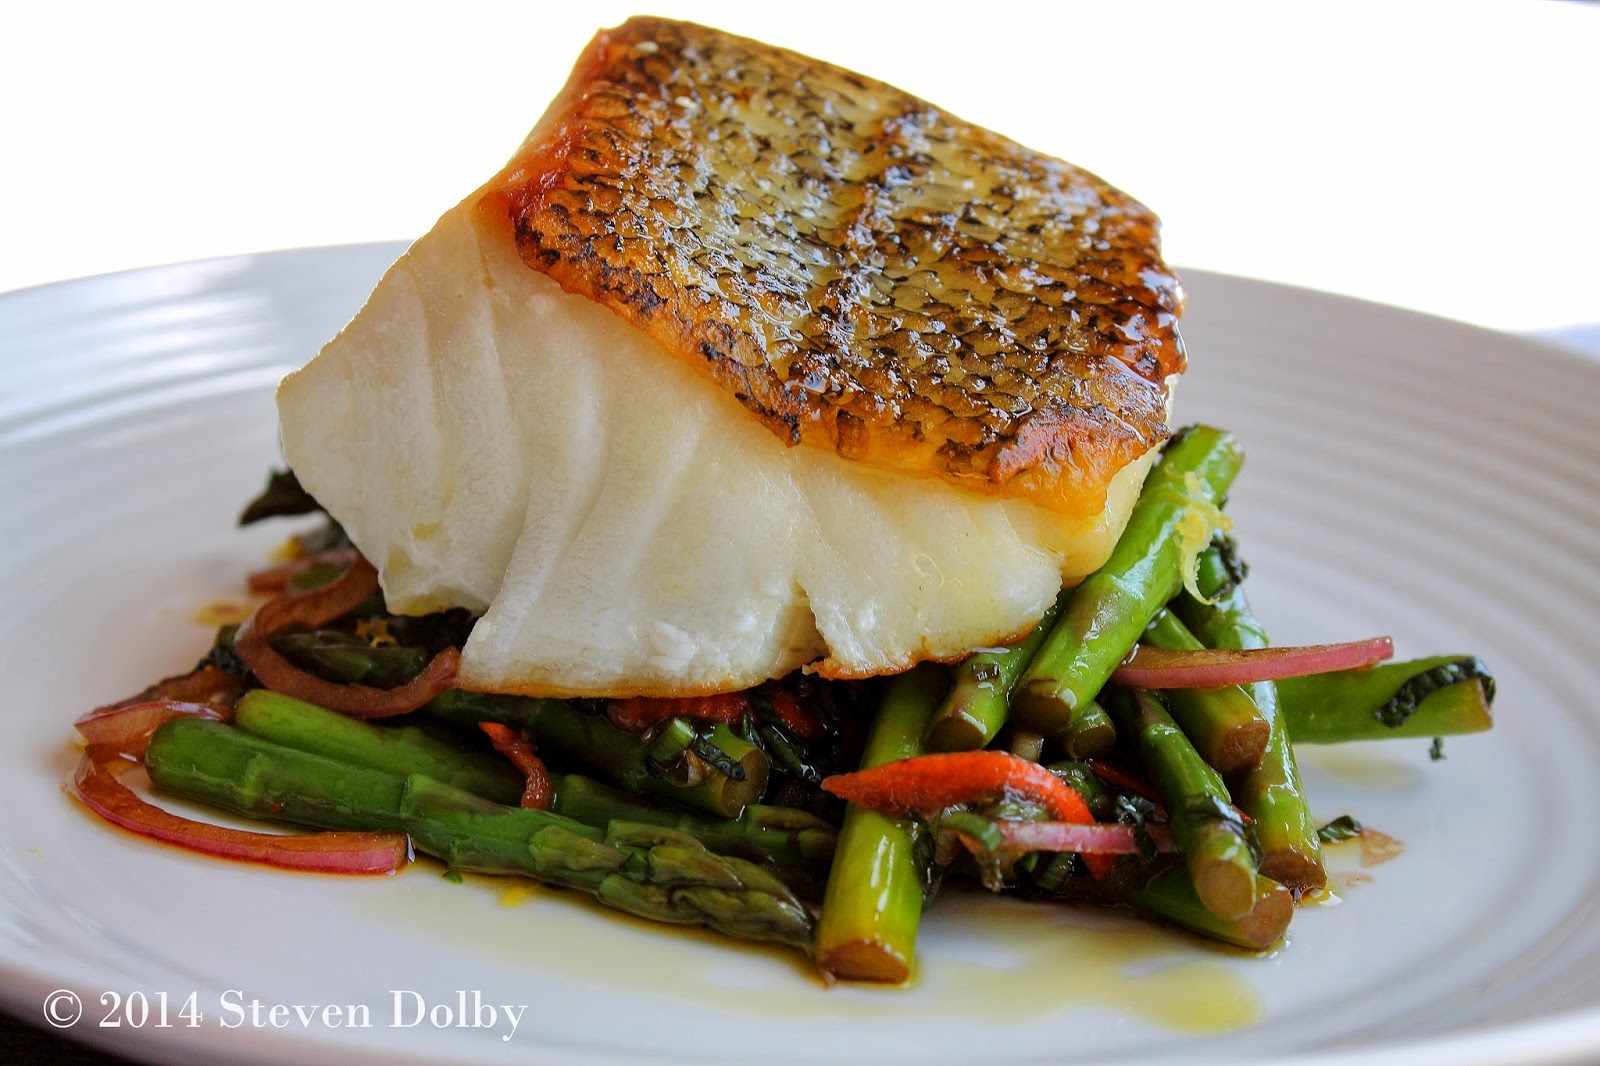 Pan Roasted Sea Bass Served With Asparagus And Mint Salad By Steven Dolby